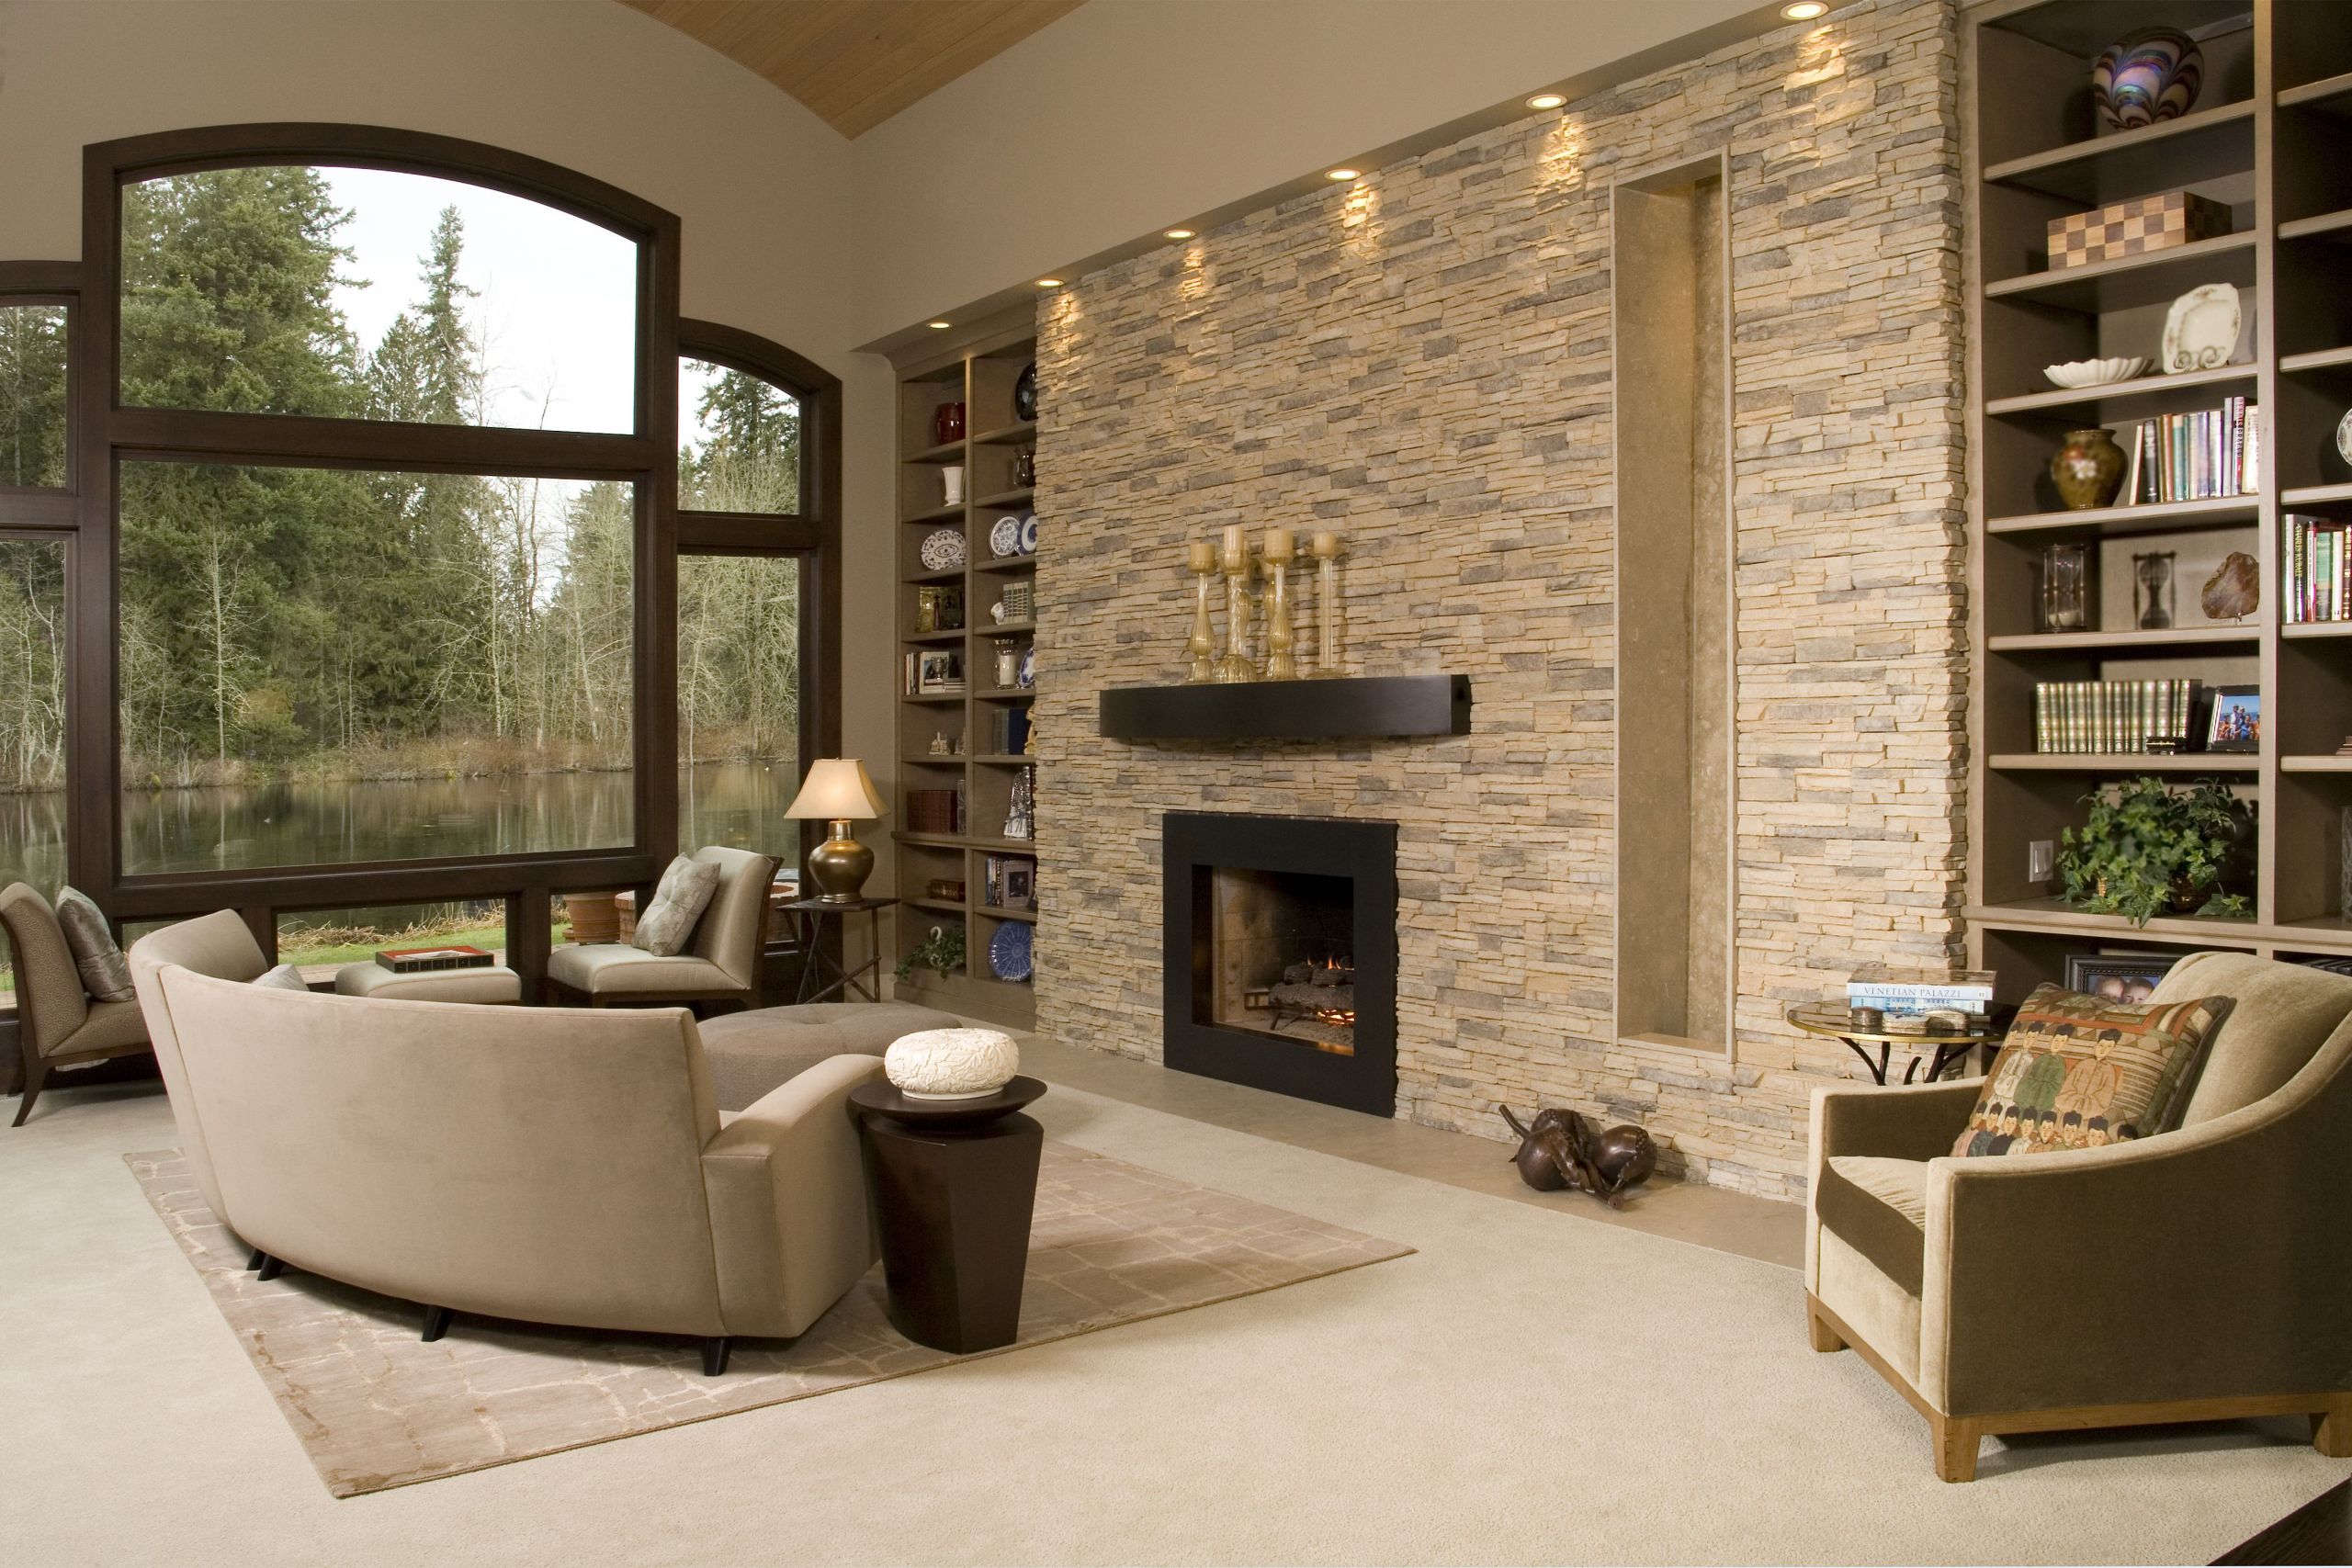 Tile Accent Wall Living Room
 Contemporary living room with stacked stone accent wall